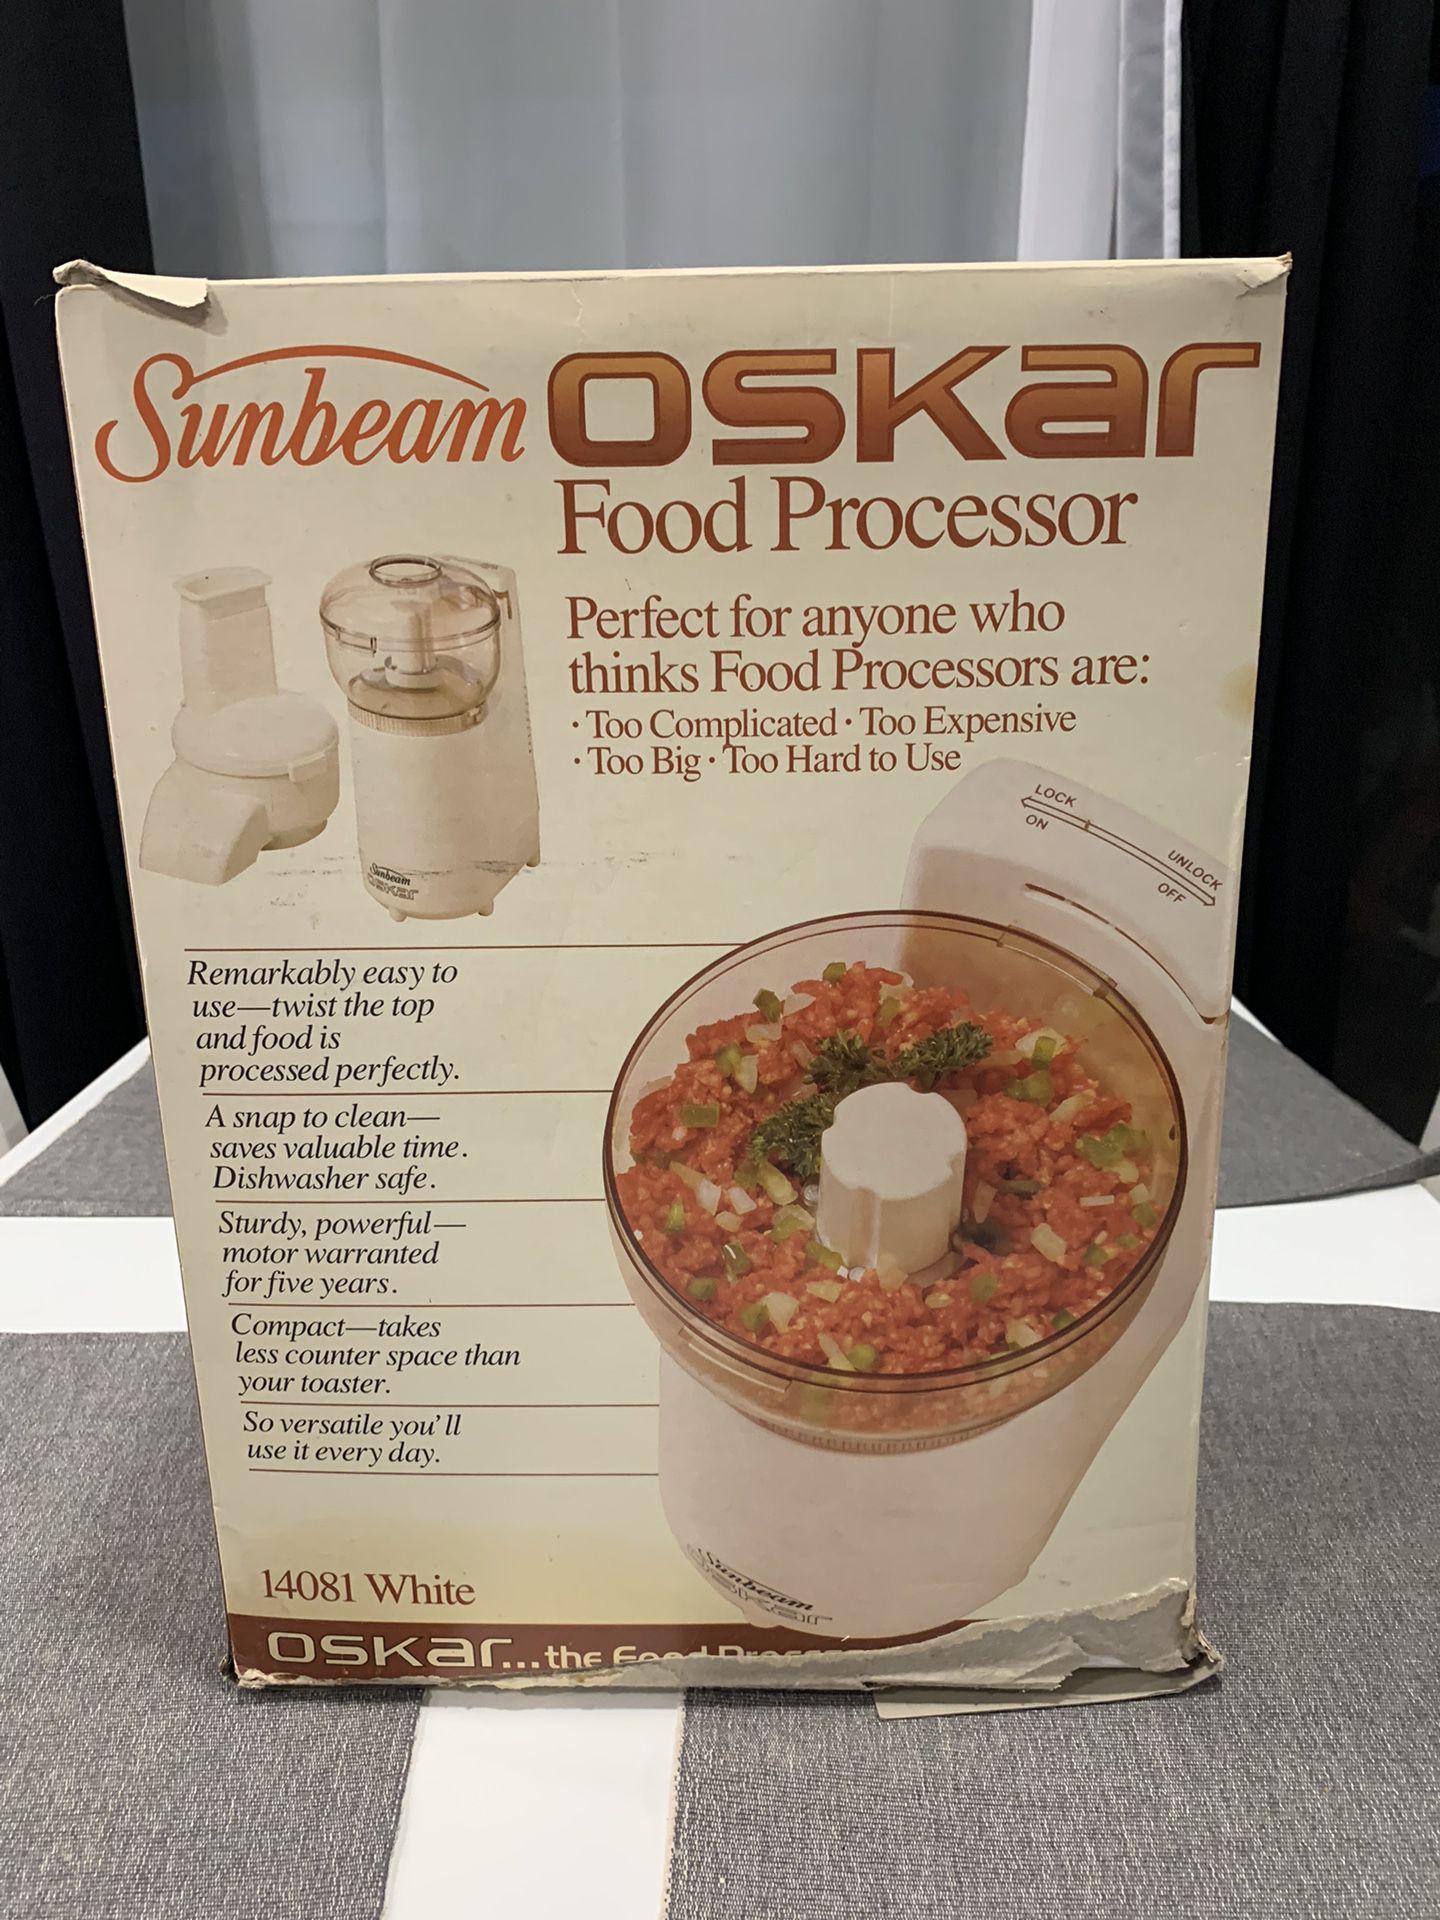 1985 Sunbeam Food Processor for Sale in Fountain Valley, CA OfferUp